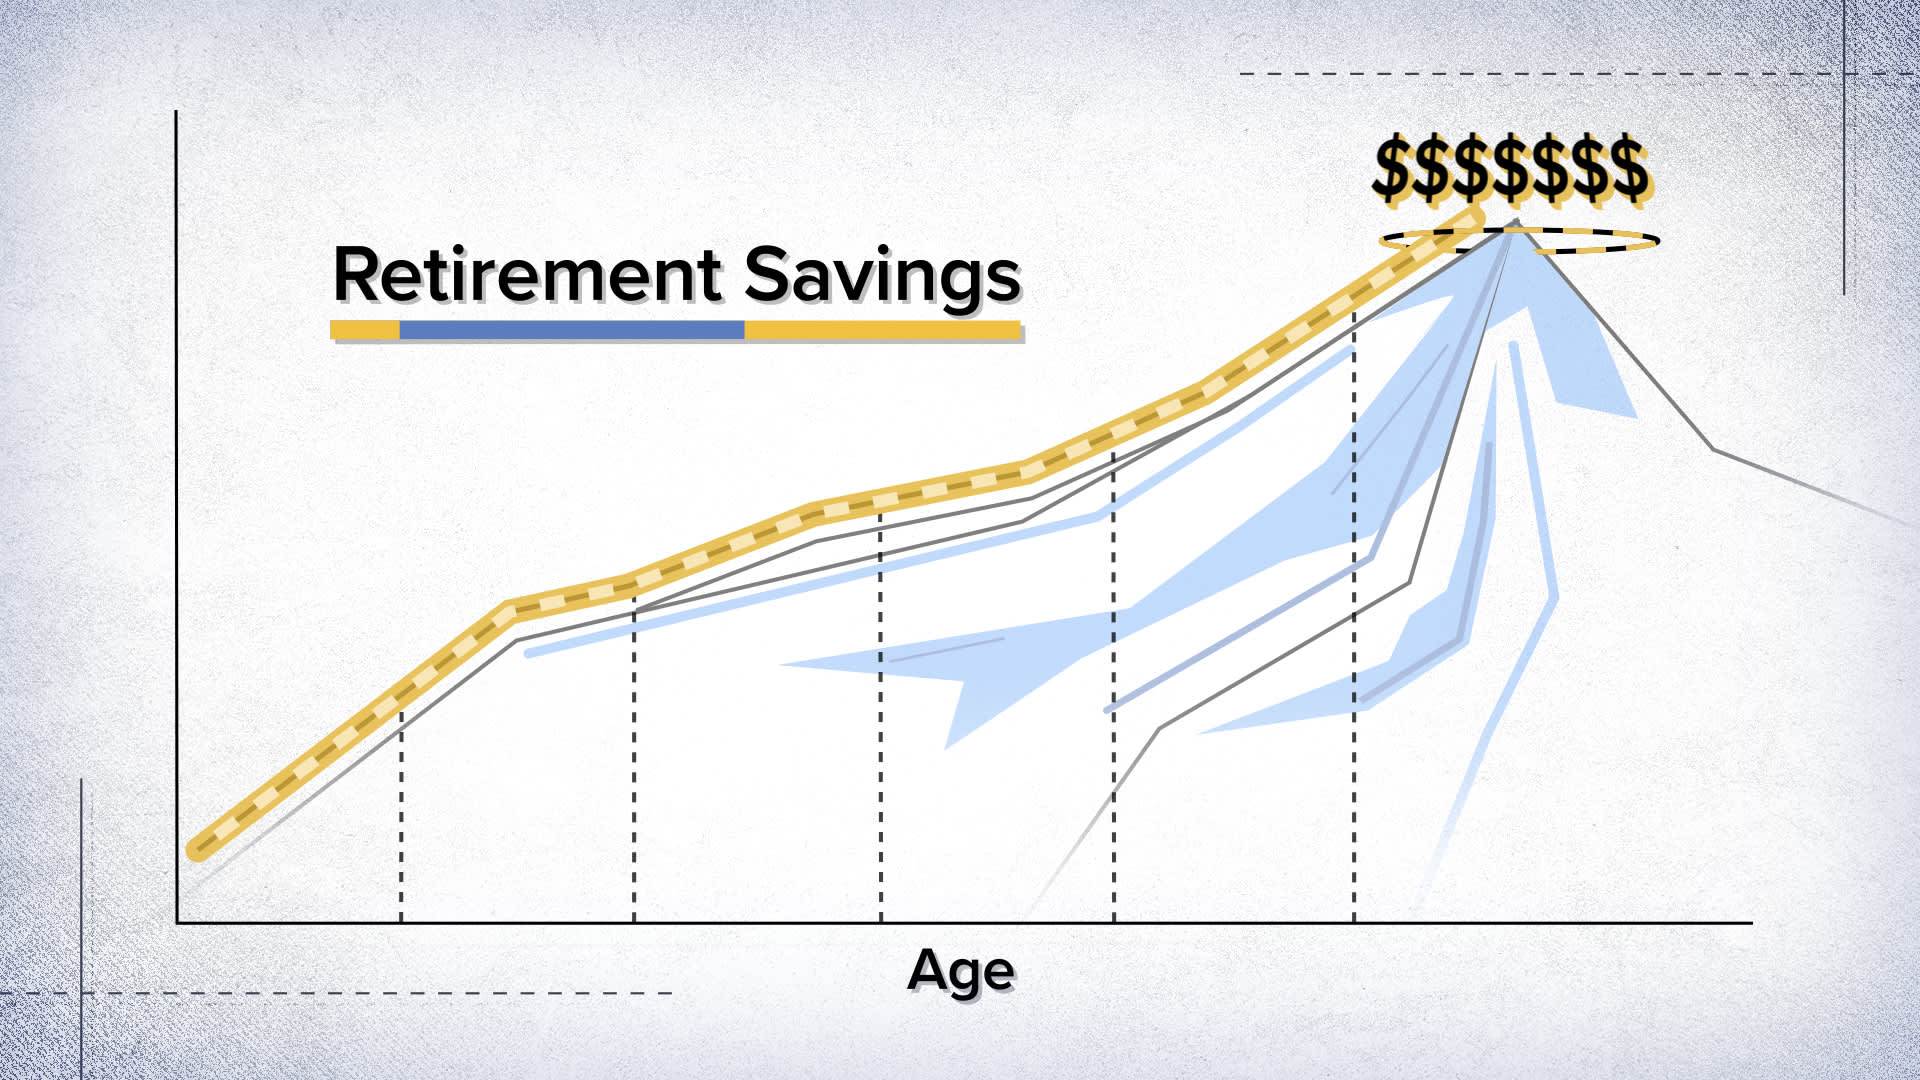 How much you need to invest every month to retire with $1 million to $3 million, broken down by age